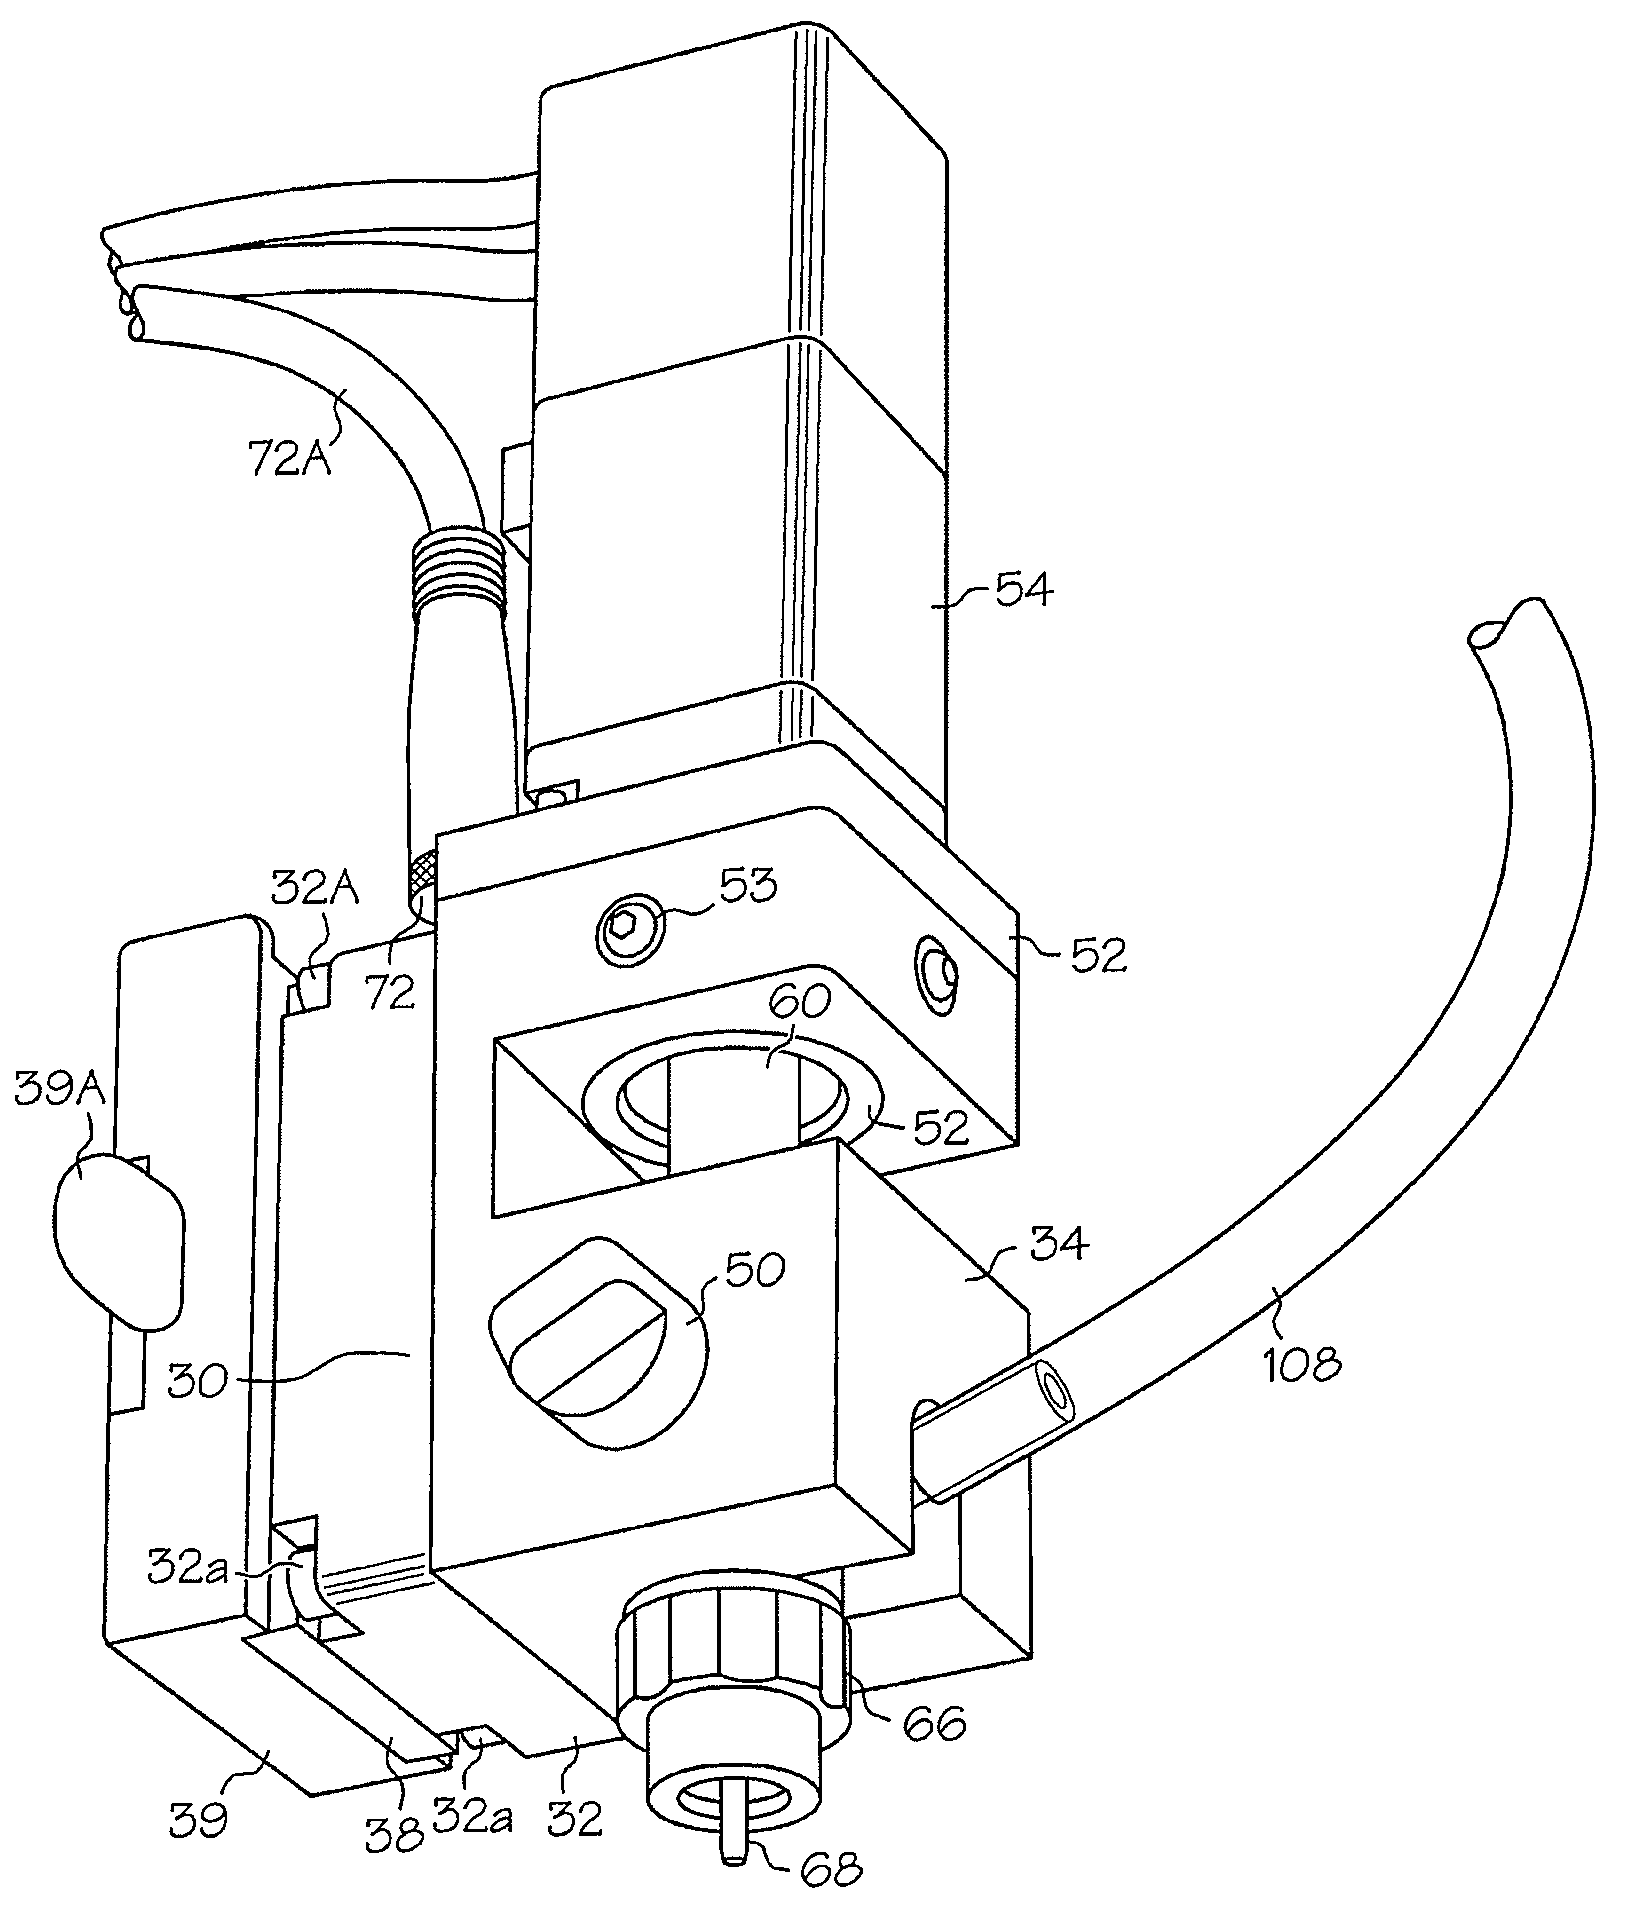 Dispense pump with heated pump housing and heated material reservoir